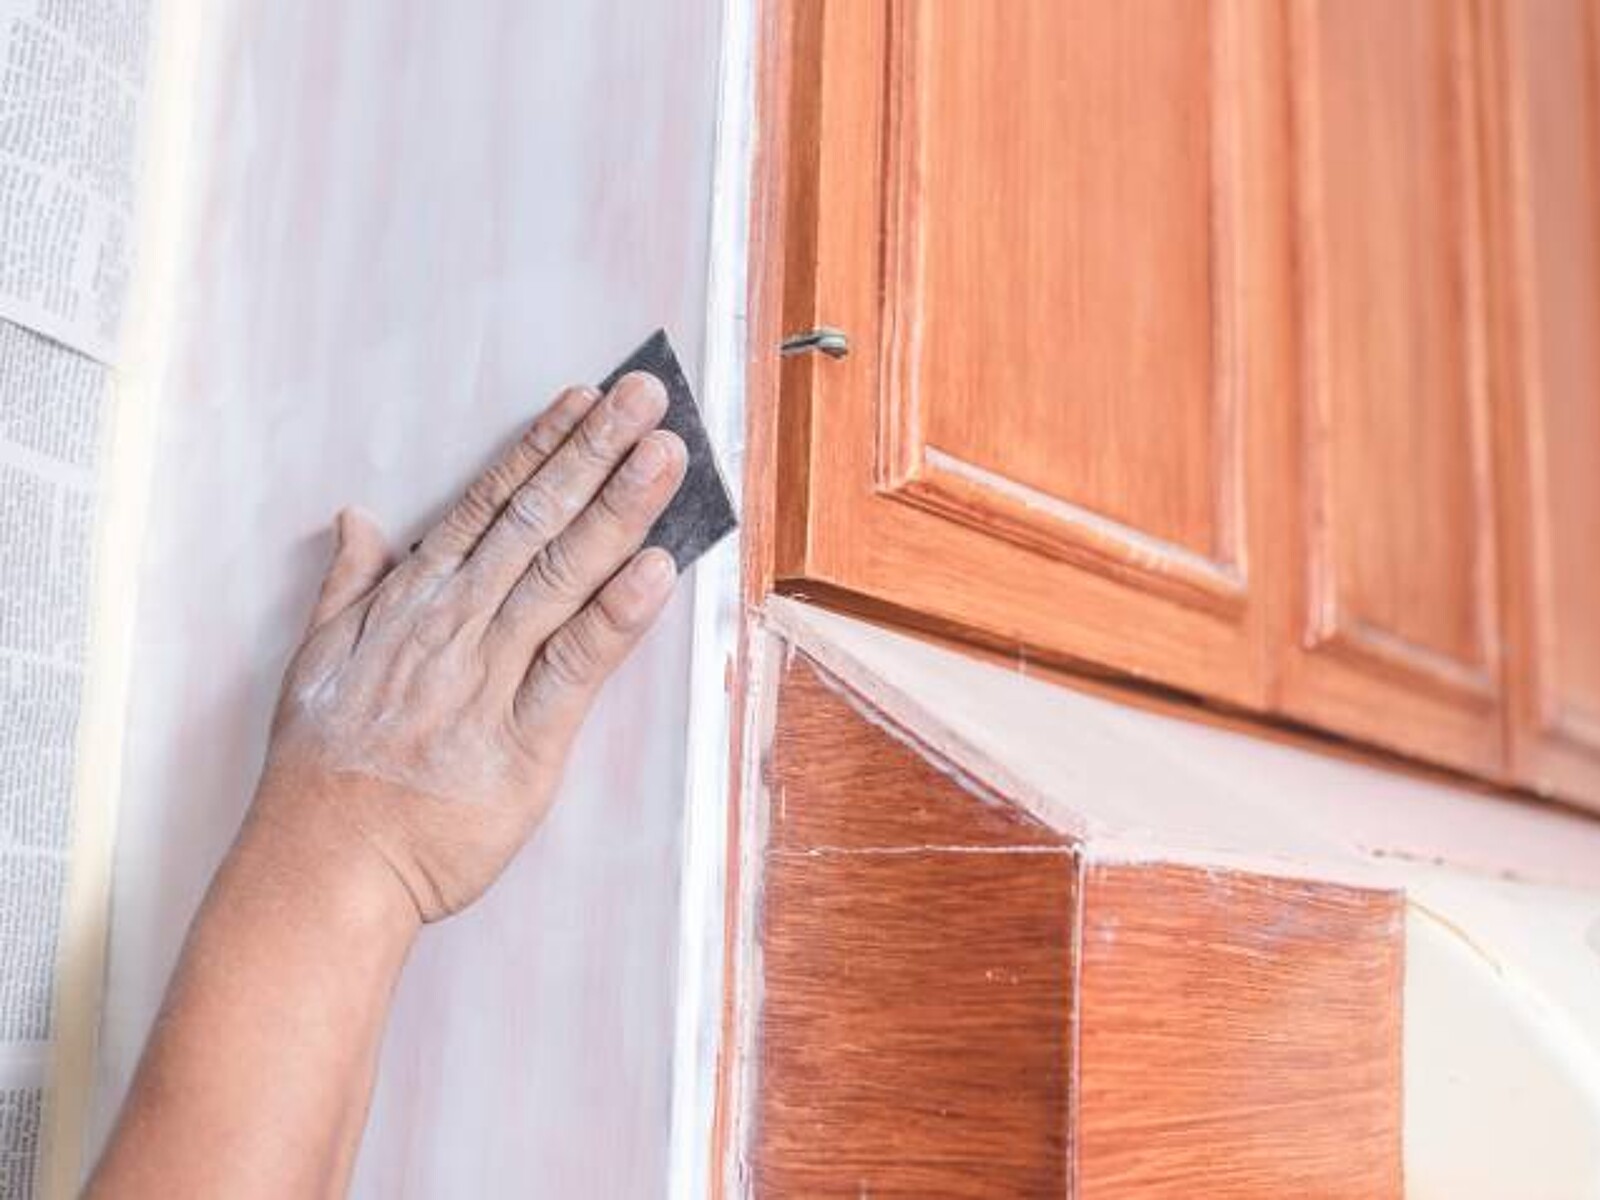 How To Paint Kitchen Cabinets